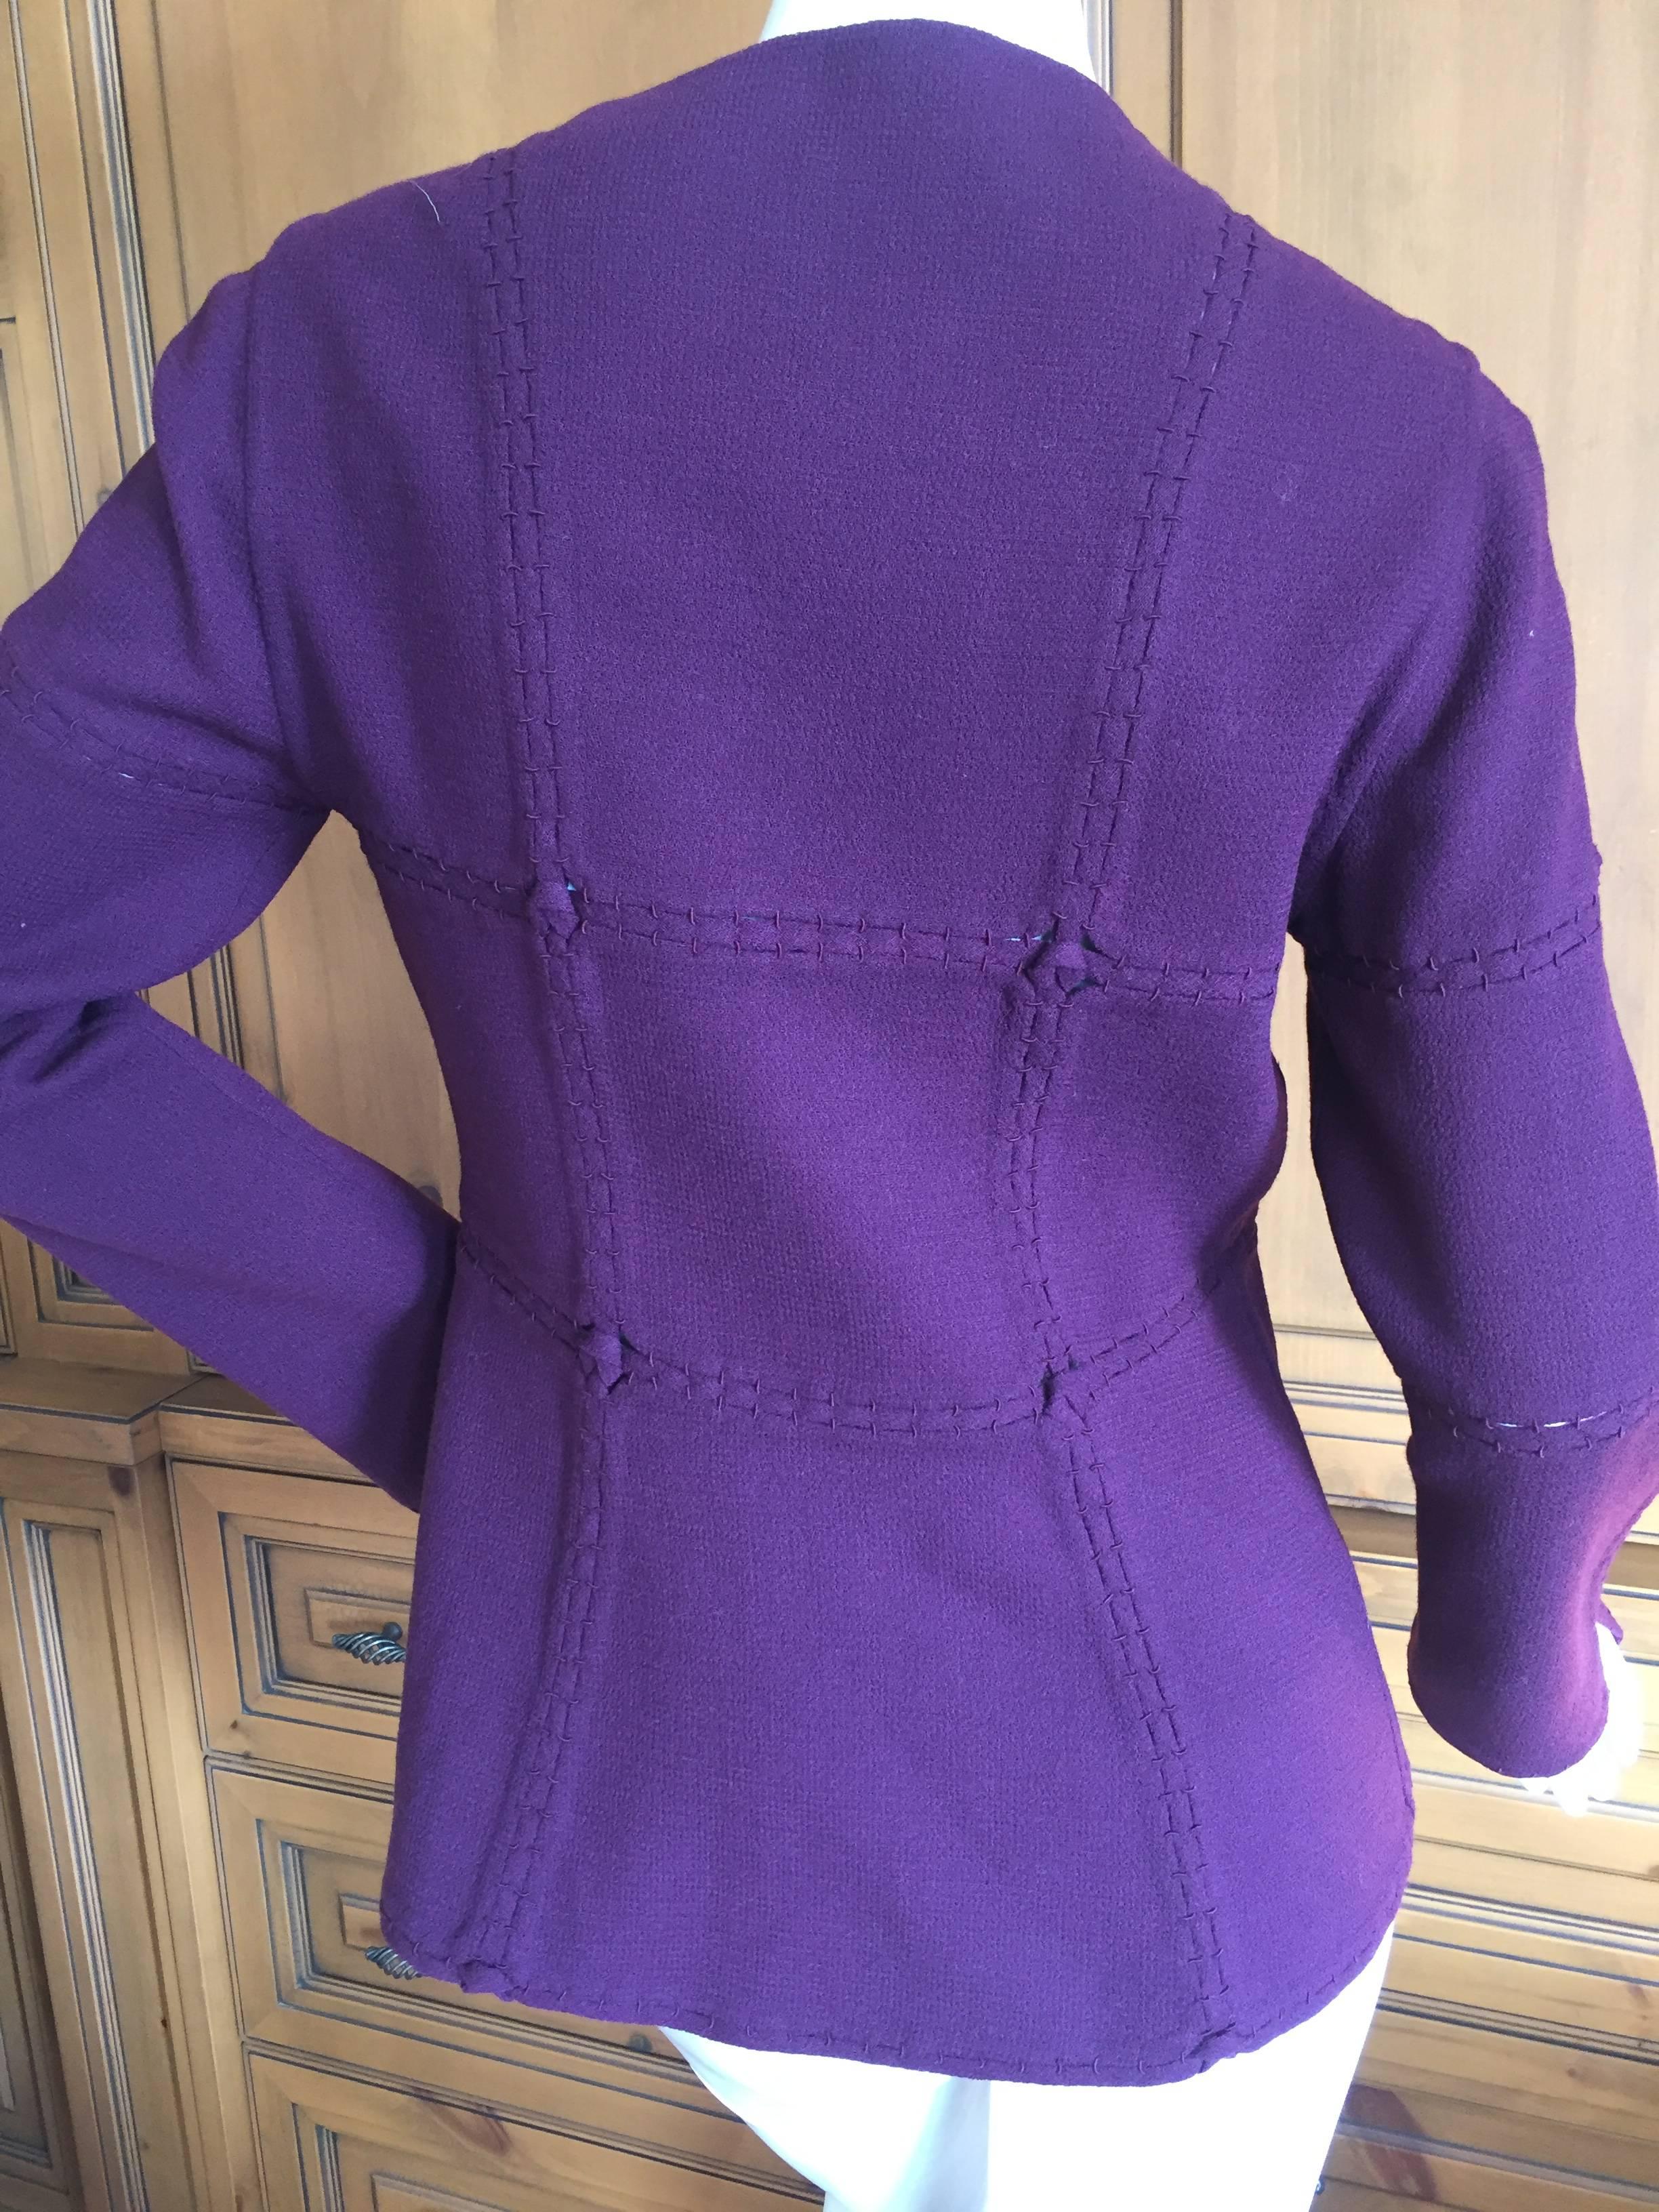 Chado Ralph Rucci Purple Jacket with Open Stitch Details  For Sale 3